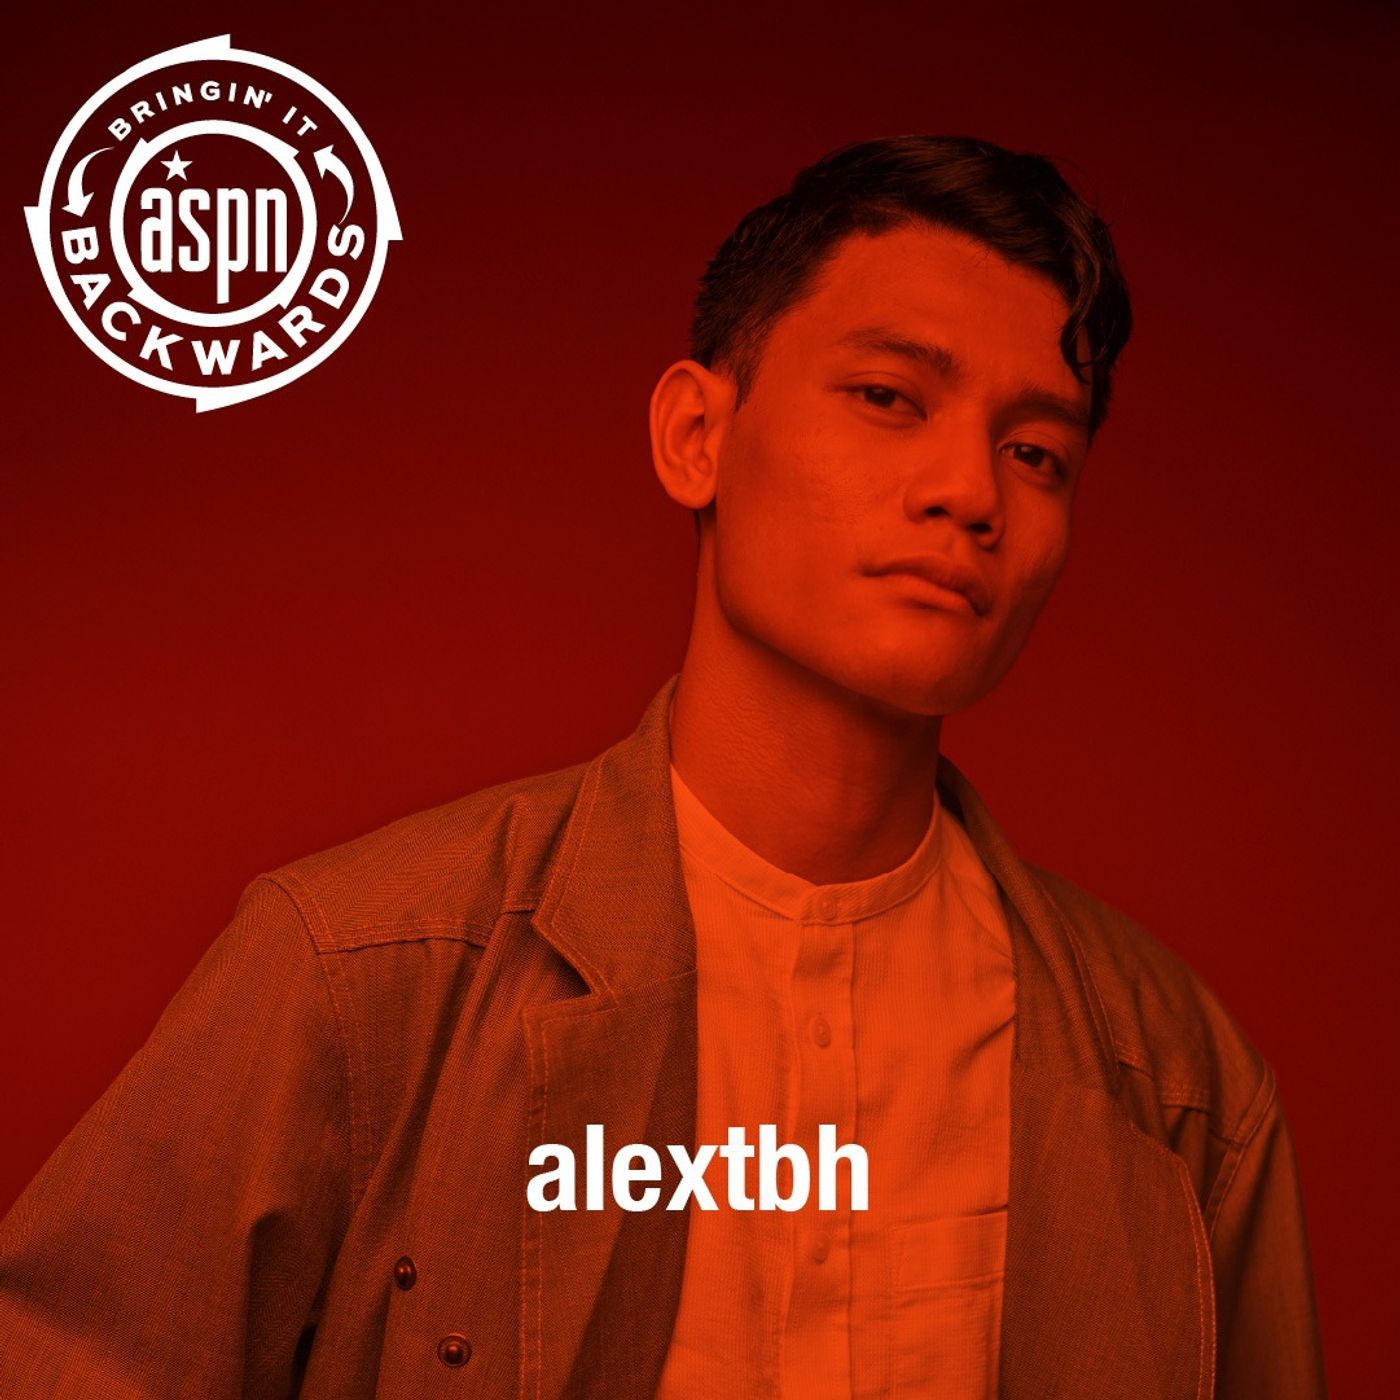 Interview with alextbh Image